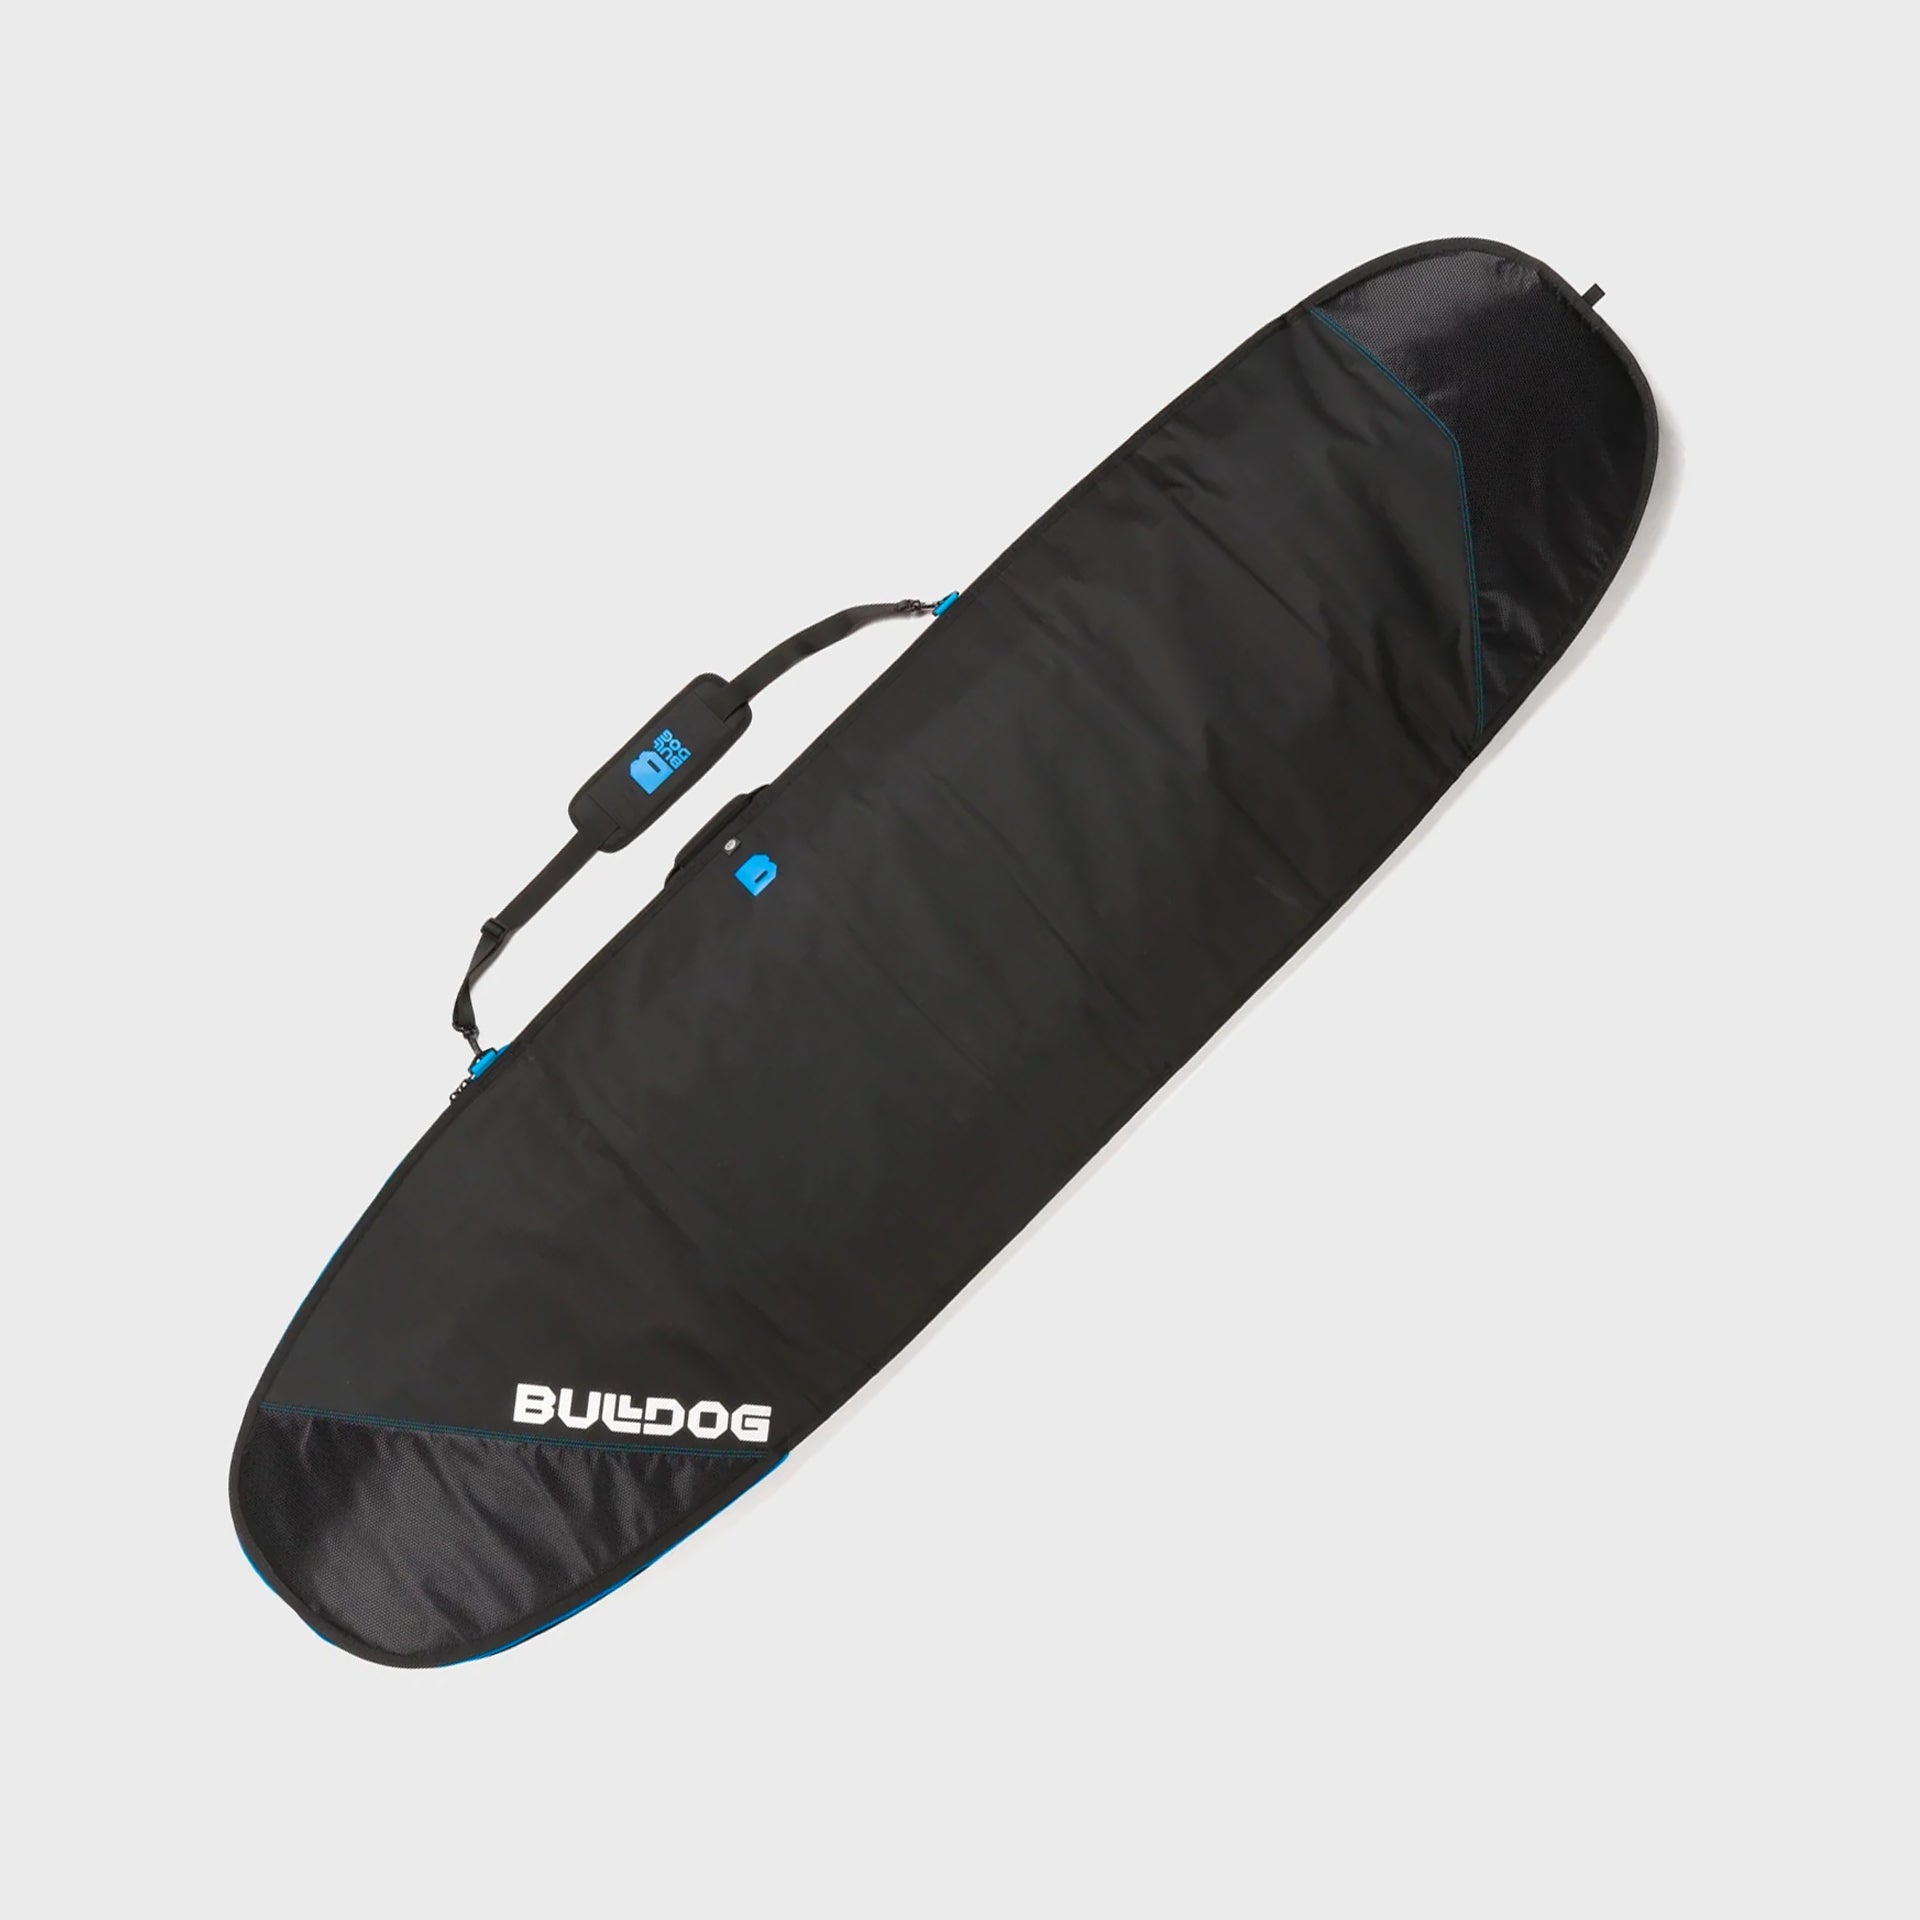 Bulldog Board Bag Core Minimal - Black/Cyan - Collect in store only - ManGo Surfing